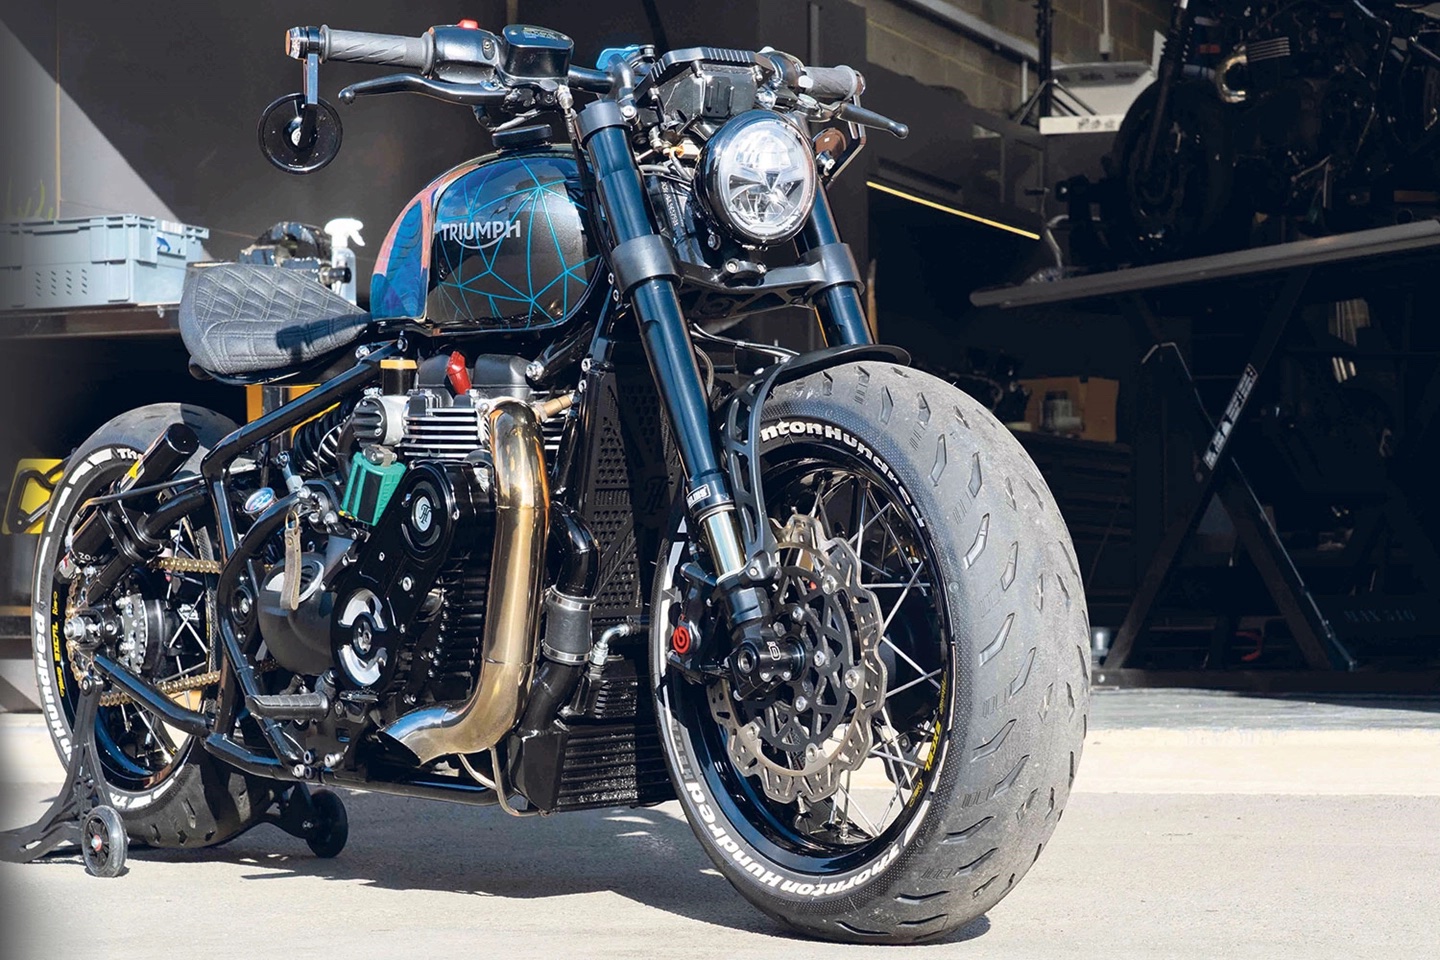 A view of the all-new custom Triumph Bonneville Bobber from the custom shop of Thorton Hundred.